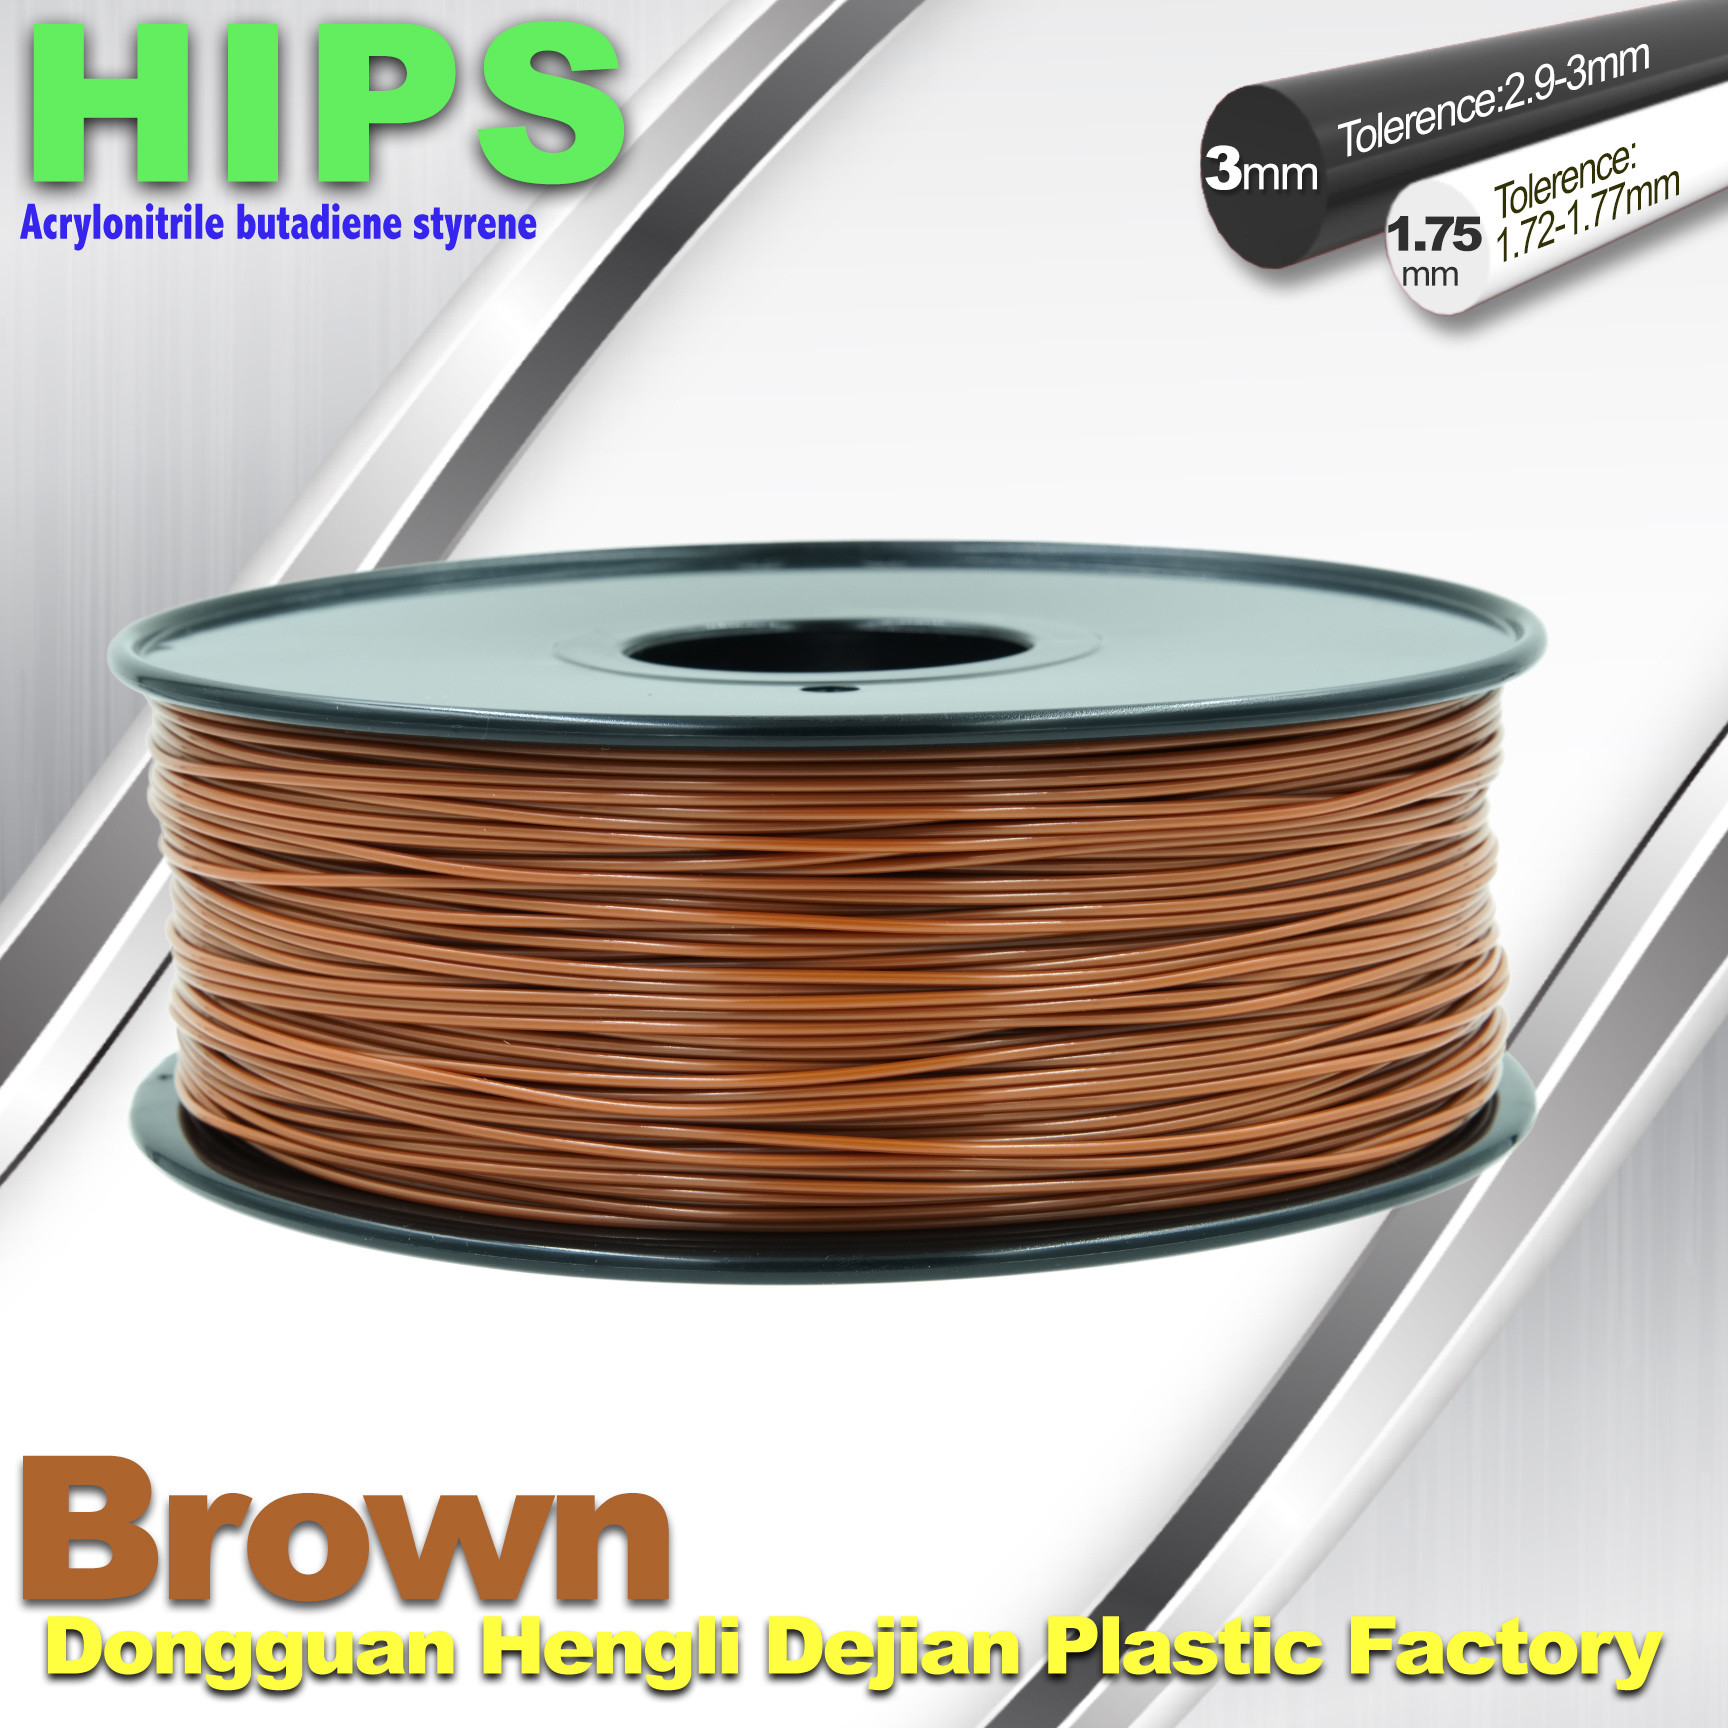 Cheap High Strength HIPS 3D Printer Filament , Cubify Filament Brown Colors for sale